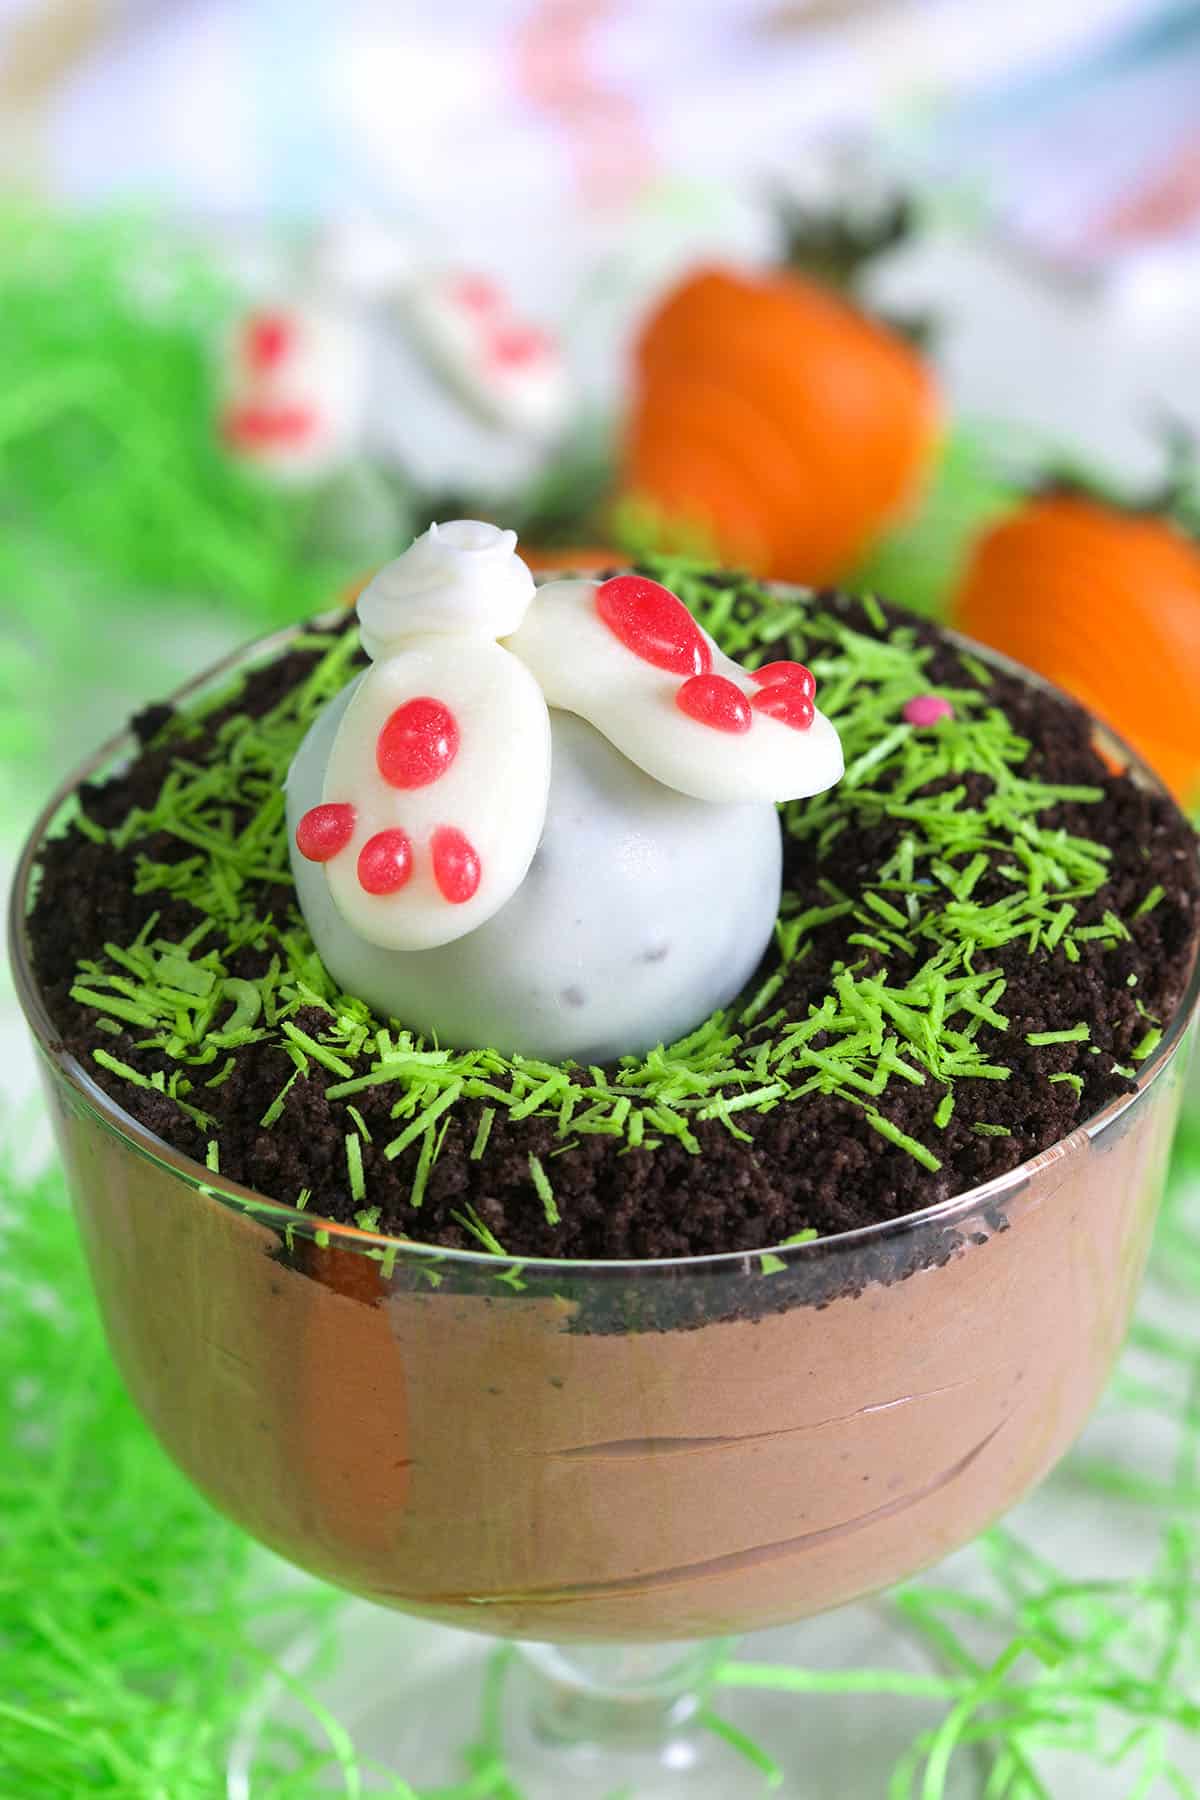 A white bunny butt truffle is placed on top of an Easter pudding dirt cup.